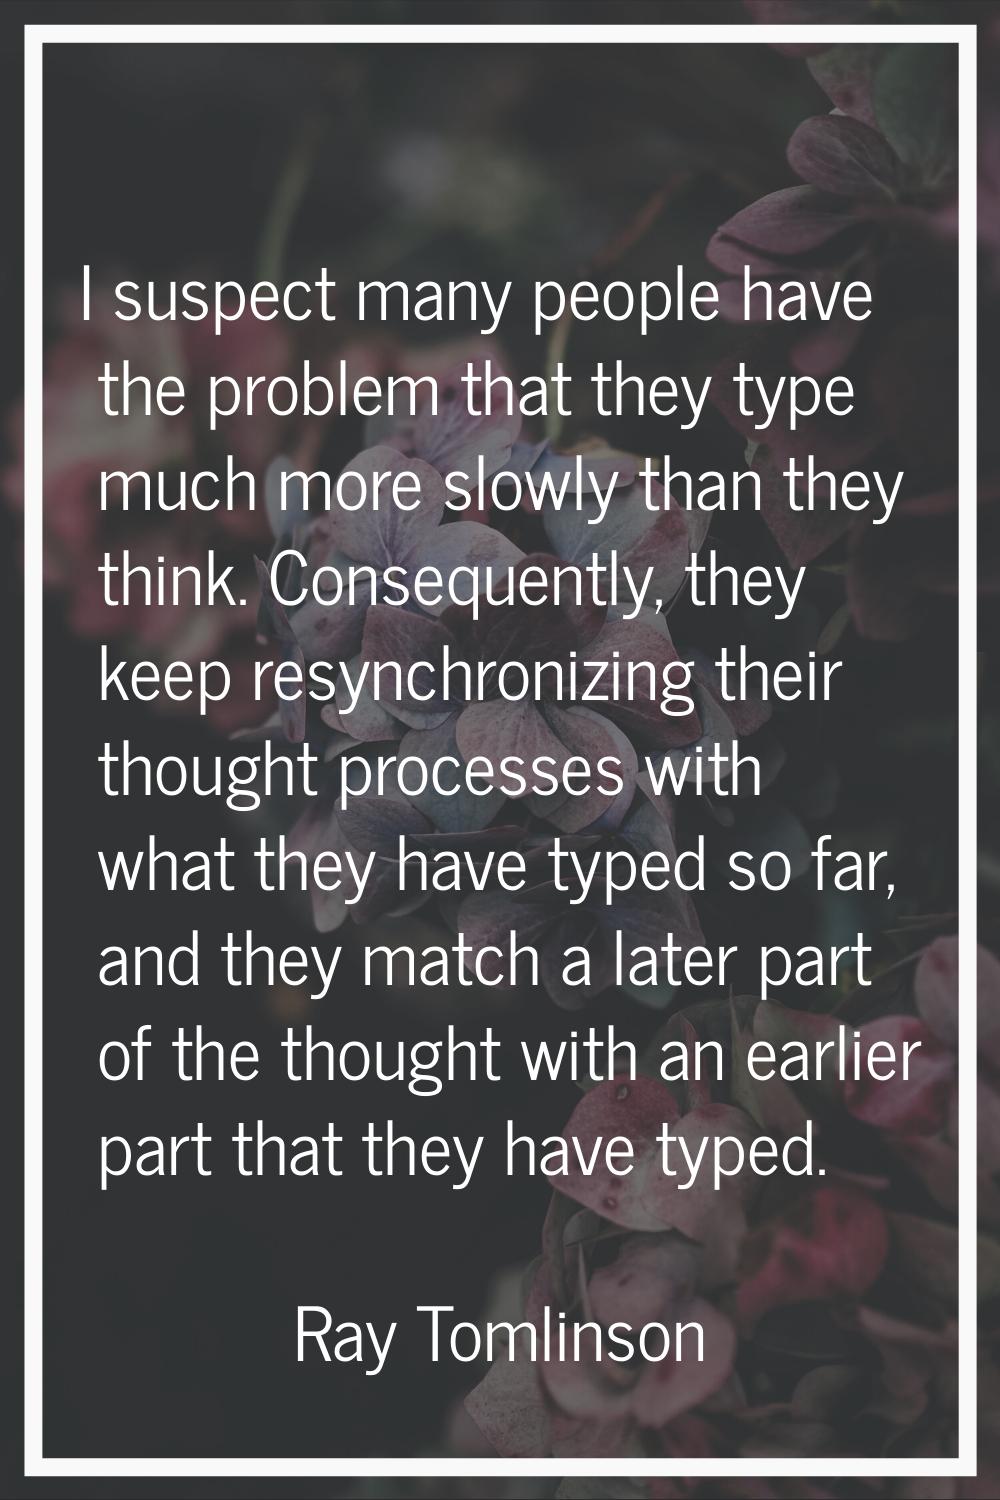 I suspect many people have the problem that they type much more slowly than they think. Consequentl